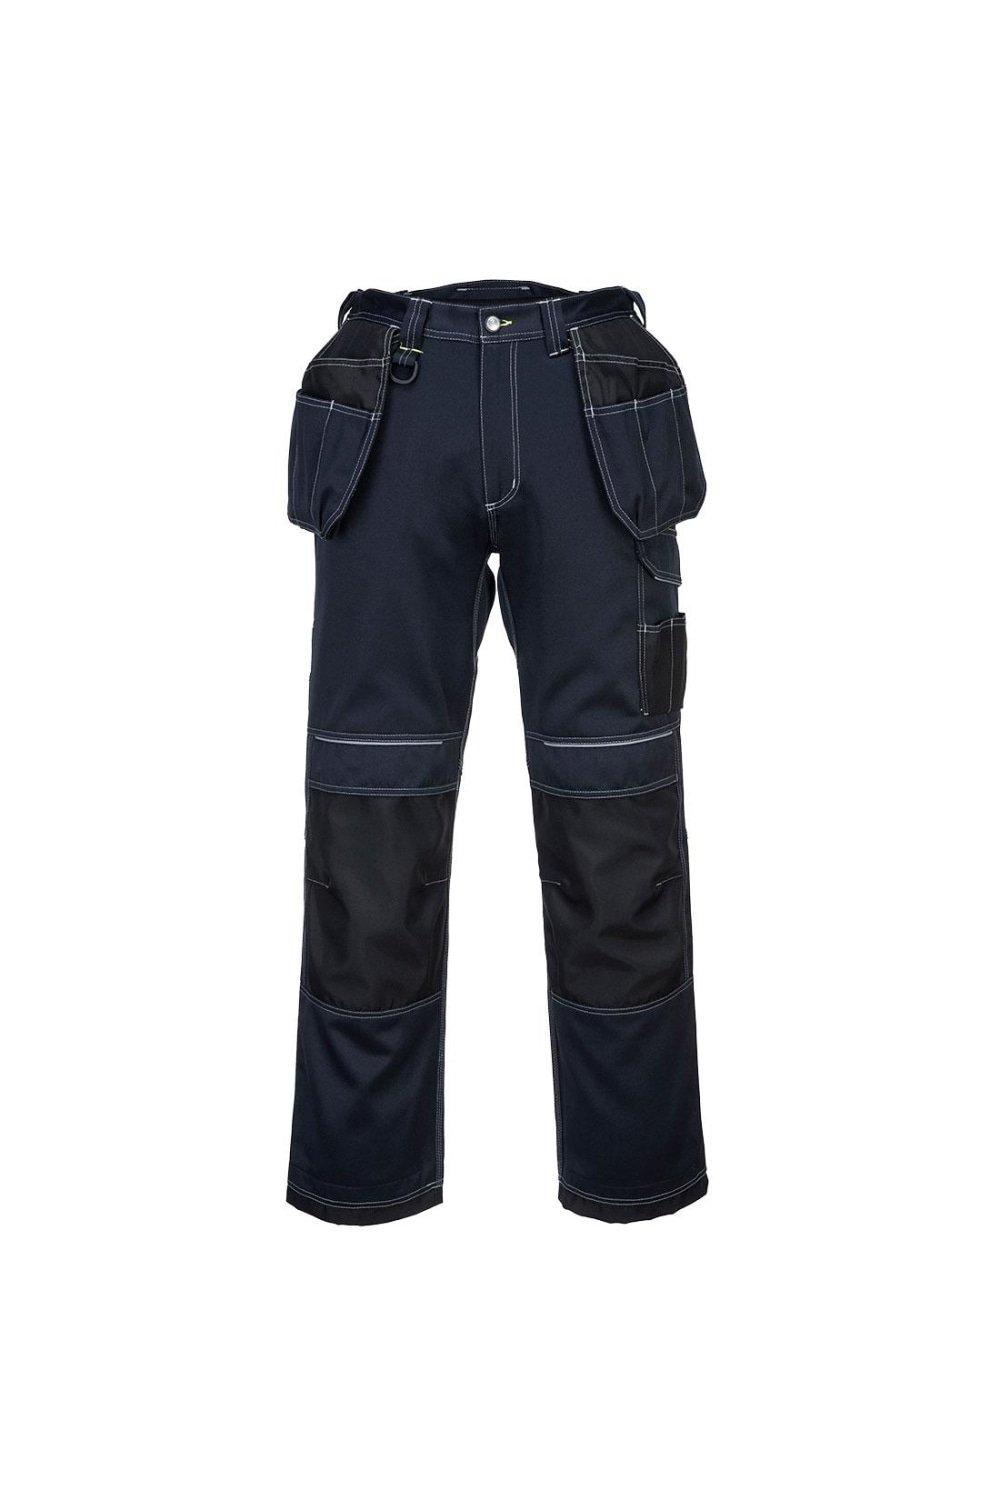 PW3 Holster Pocket Work Trousers